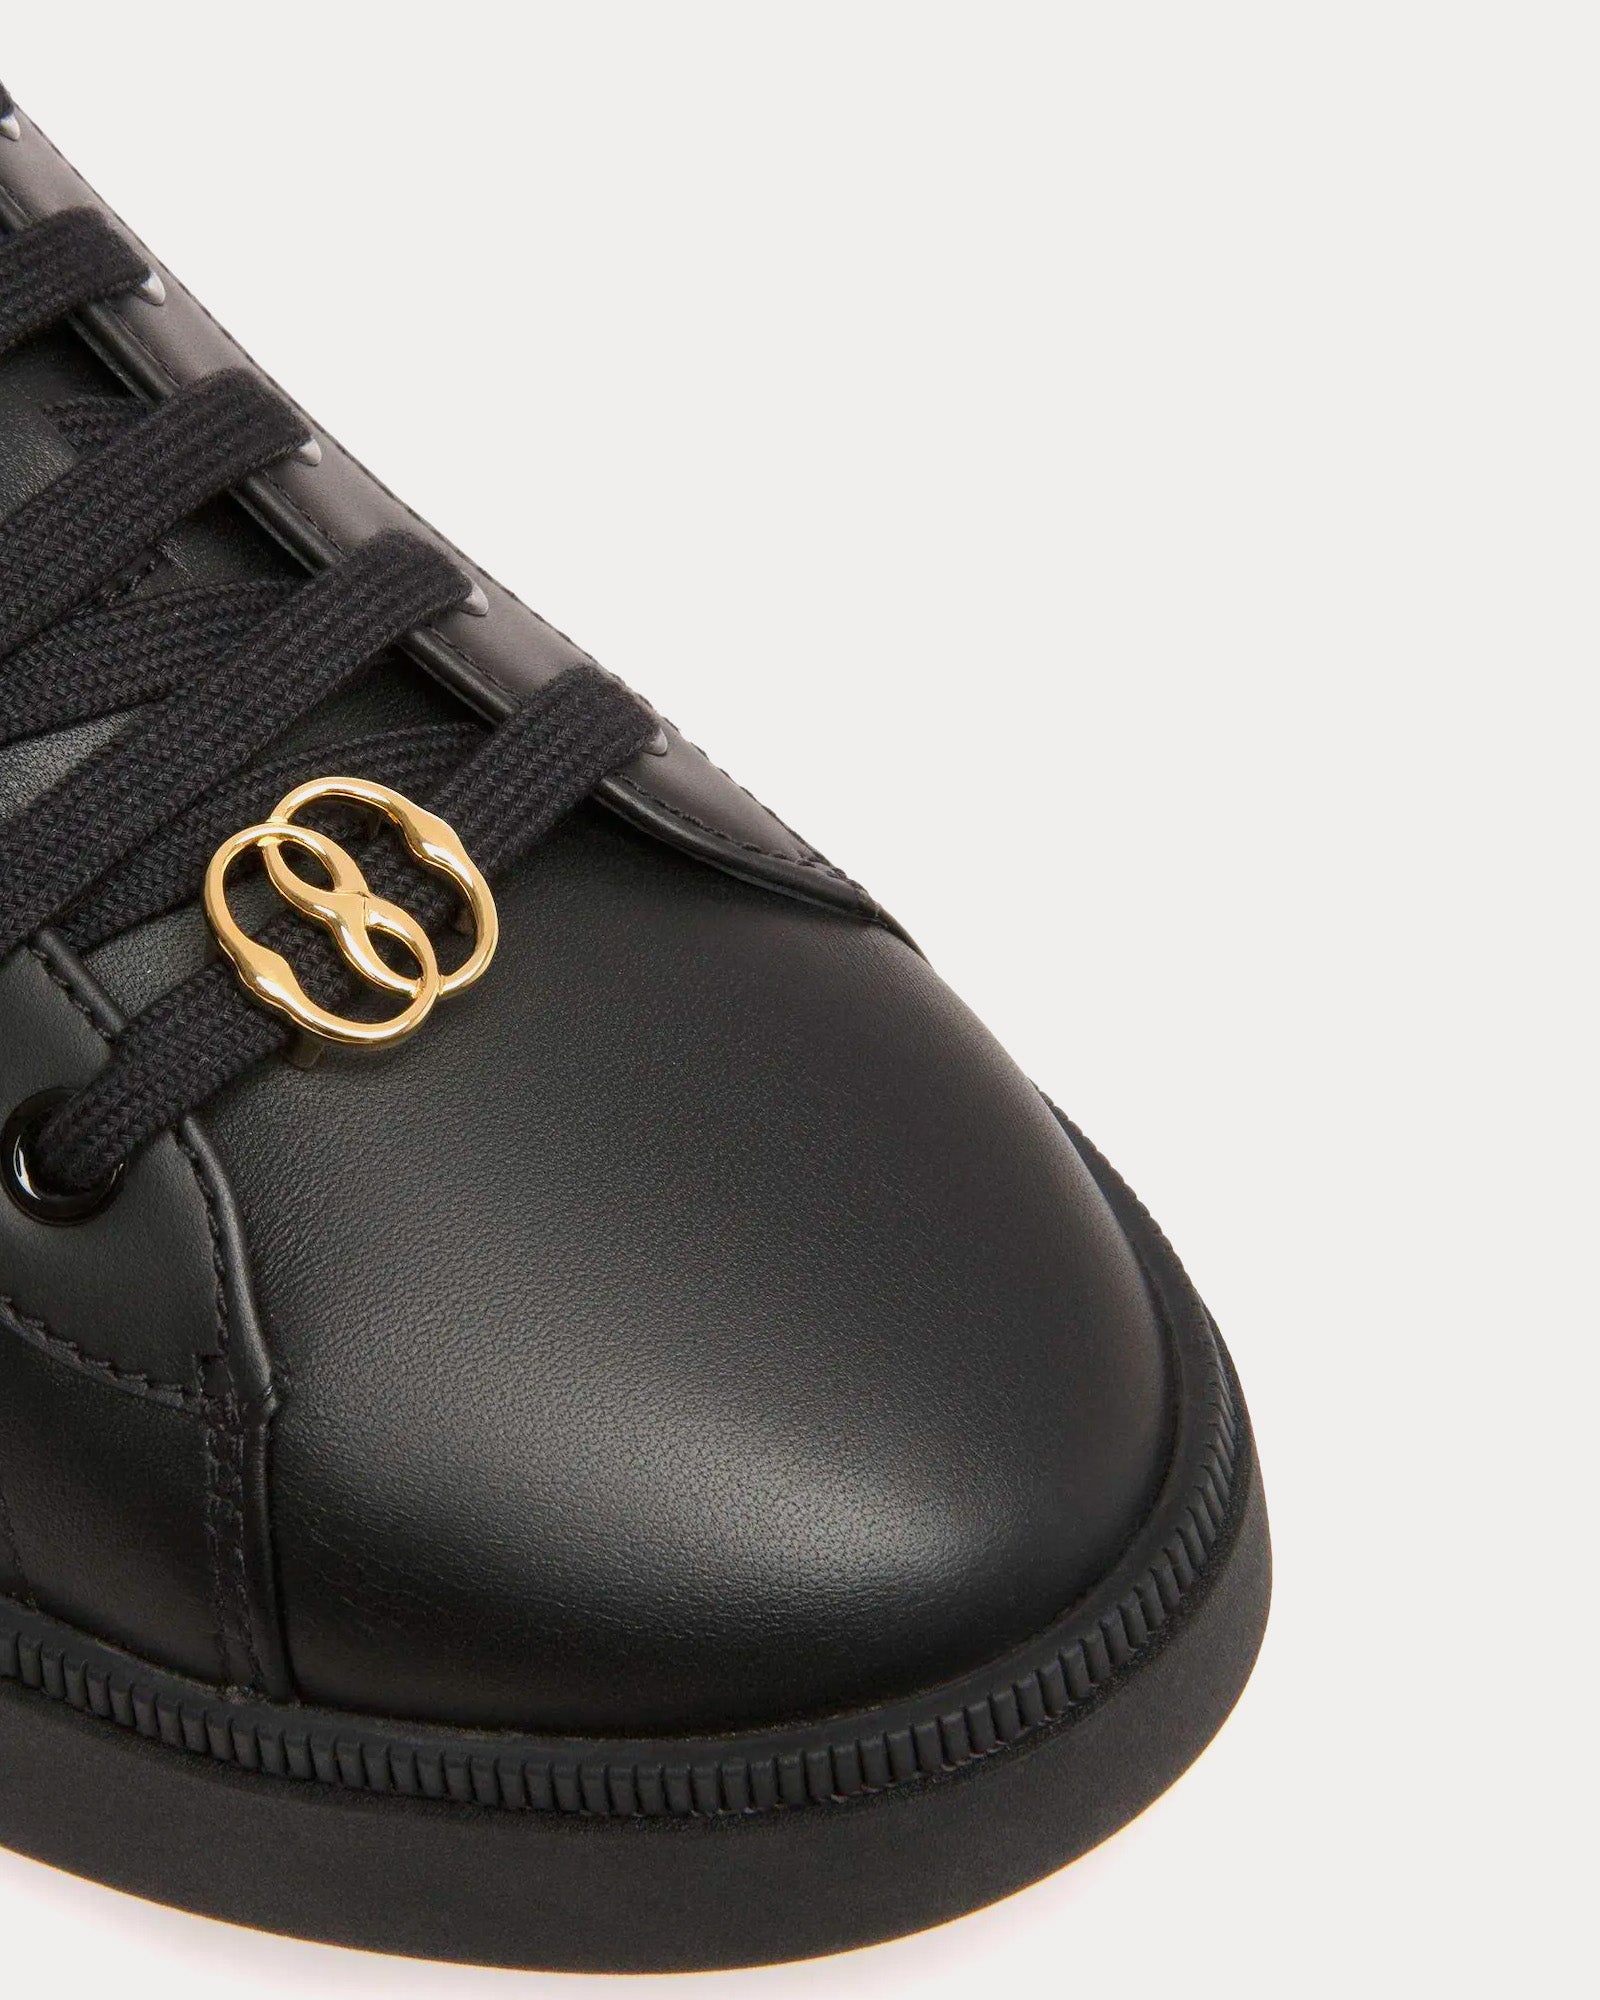 Bally - Raise Leather Black Low Top Sneakers